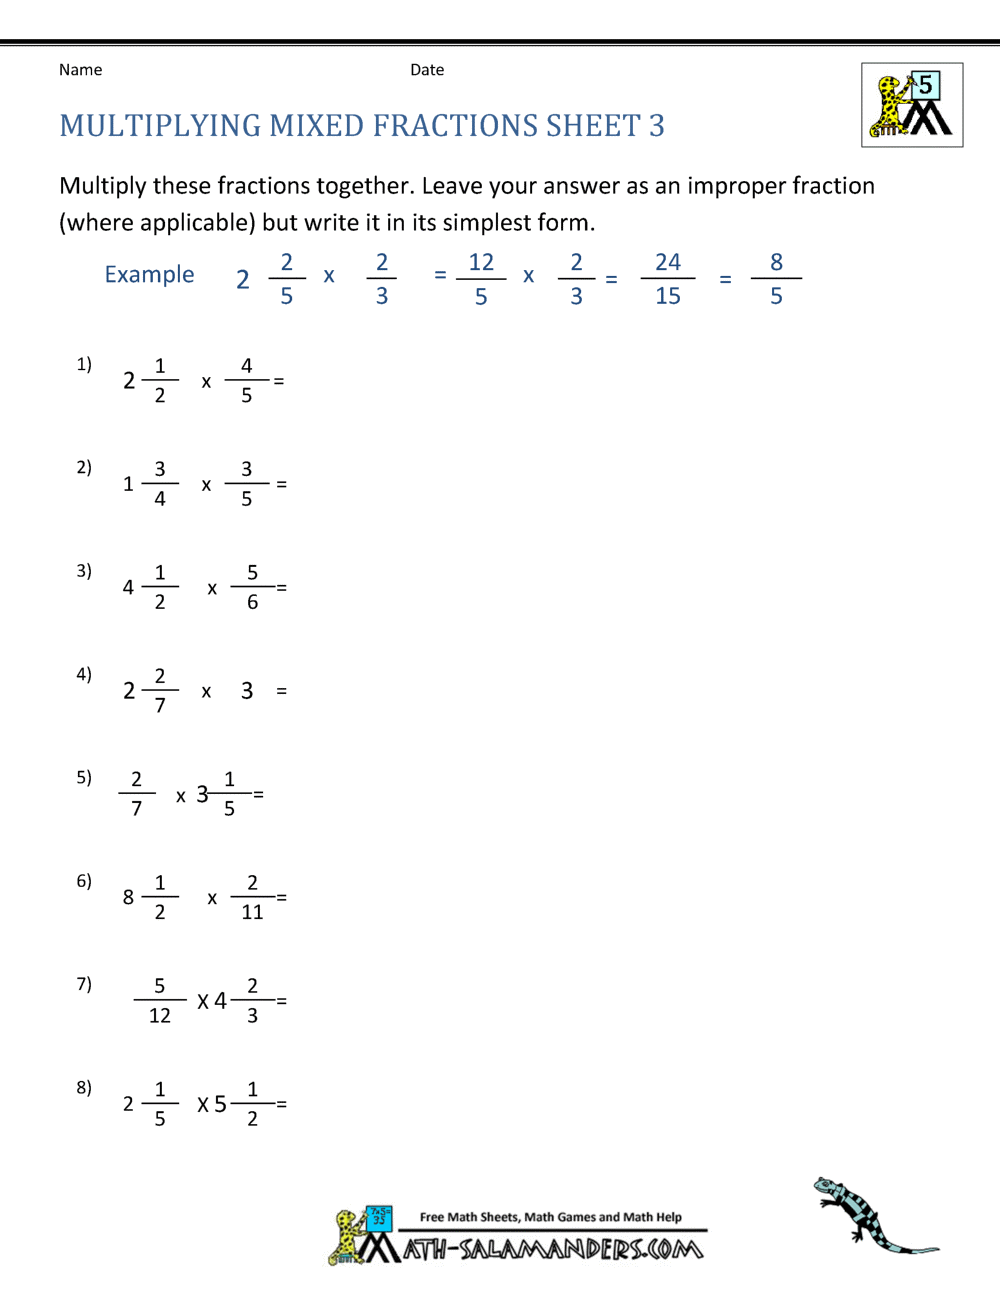 multiply-fractions-by-whole-numbers-worksheet